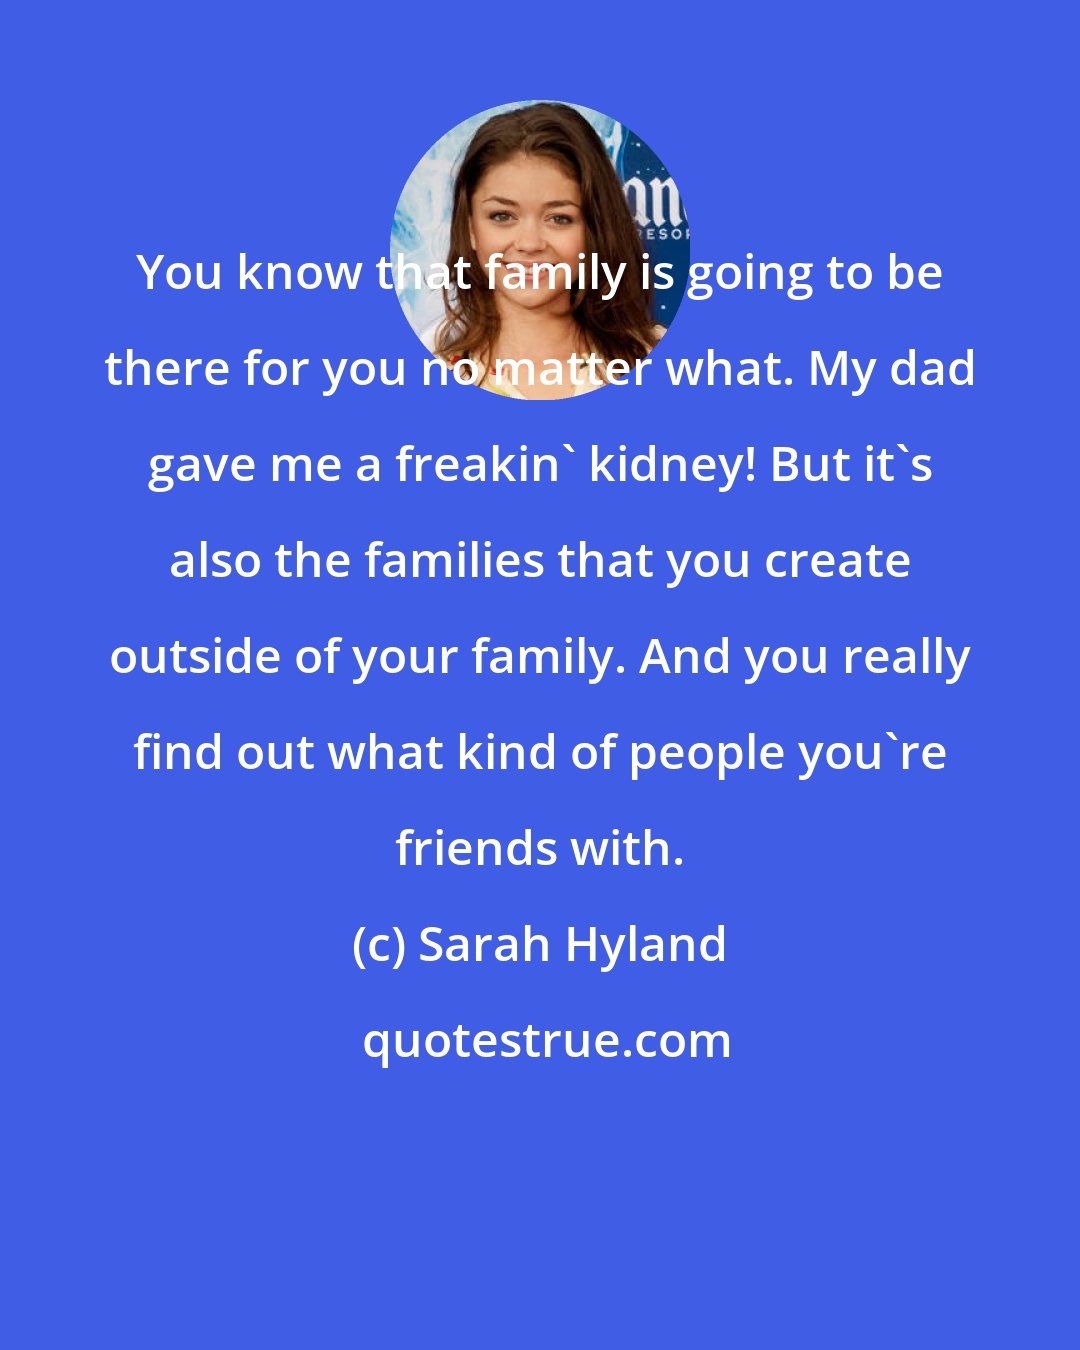 Sarah Hyland: You know that family is going to be there for you no matter what. My dad gave me a freakin' kidney! But it's also the families that you create outside of your family. And you really find out what kind of people you're friends with.